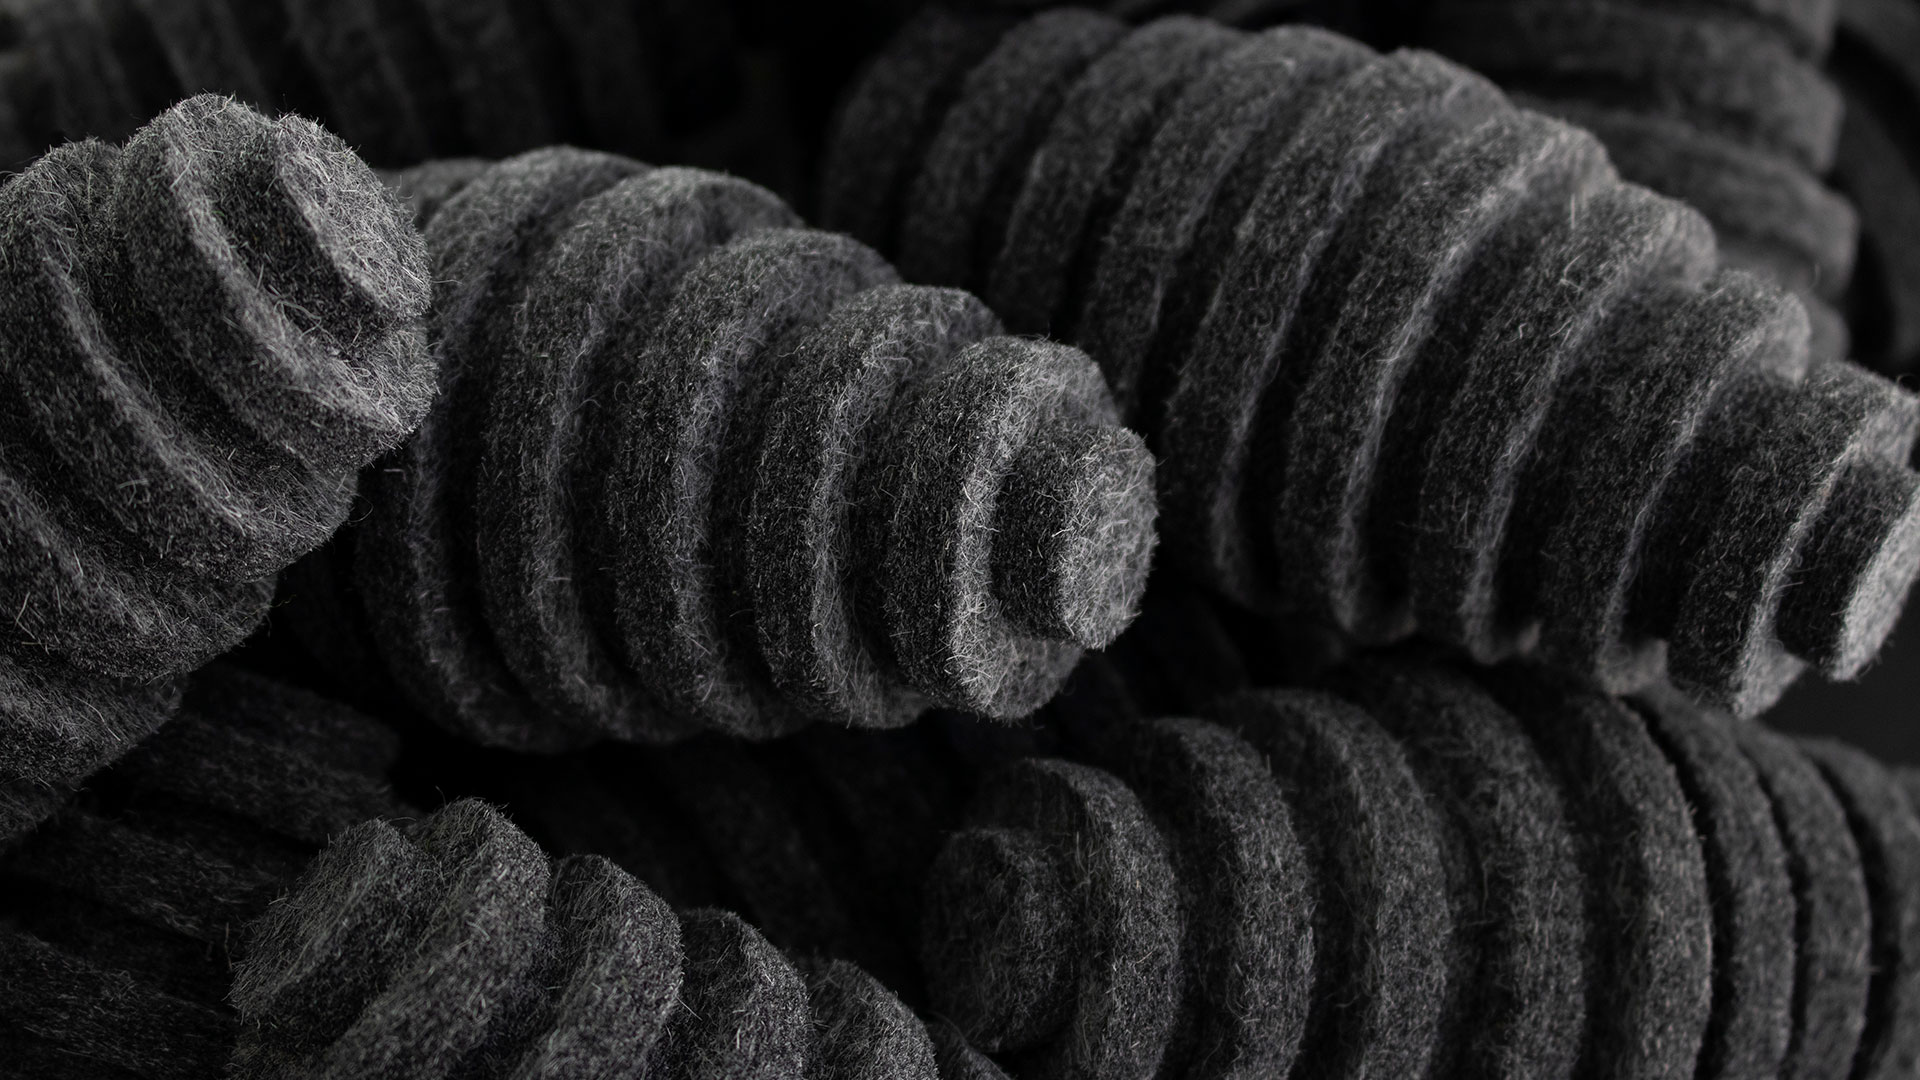 Closeup of pile of dark gray felt pods. They are oblong egg-shaped and have ridges.